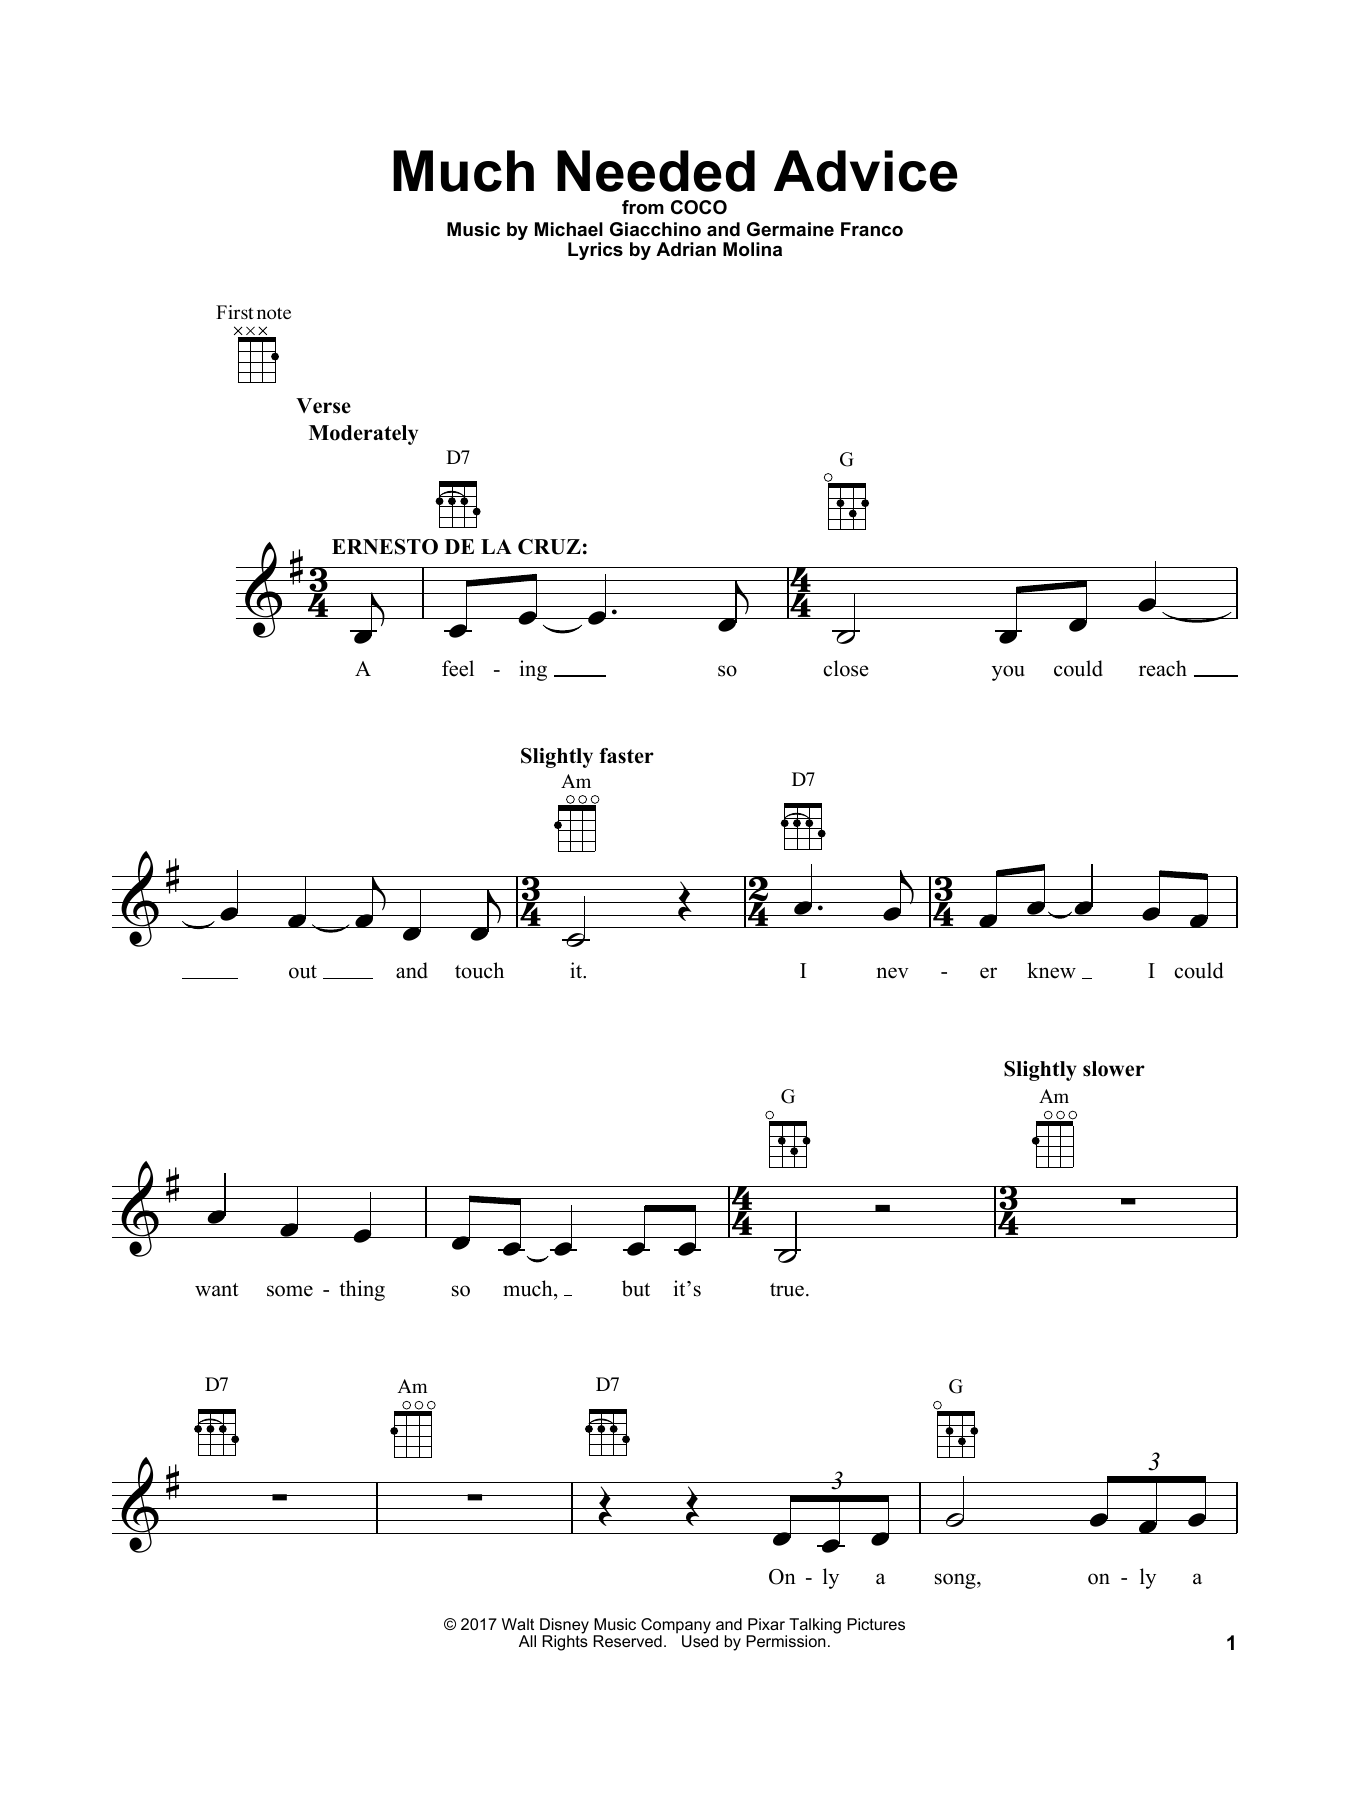 Download Michael Giacchino Much Needed Advice (from Coco) Sheet Music